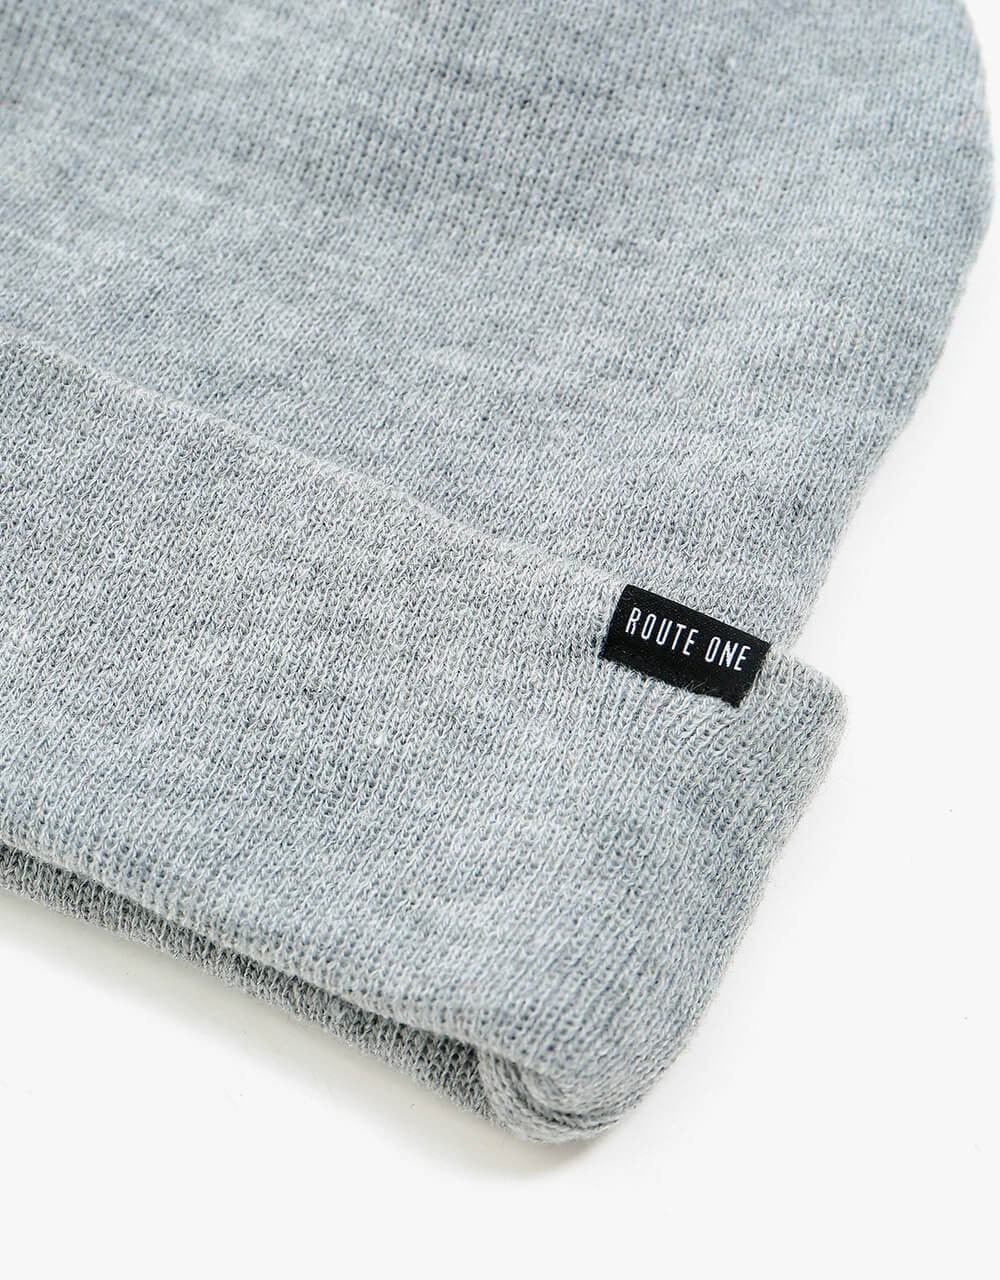 Route One Recycled NY Cuff Beanie - Heather Grey